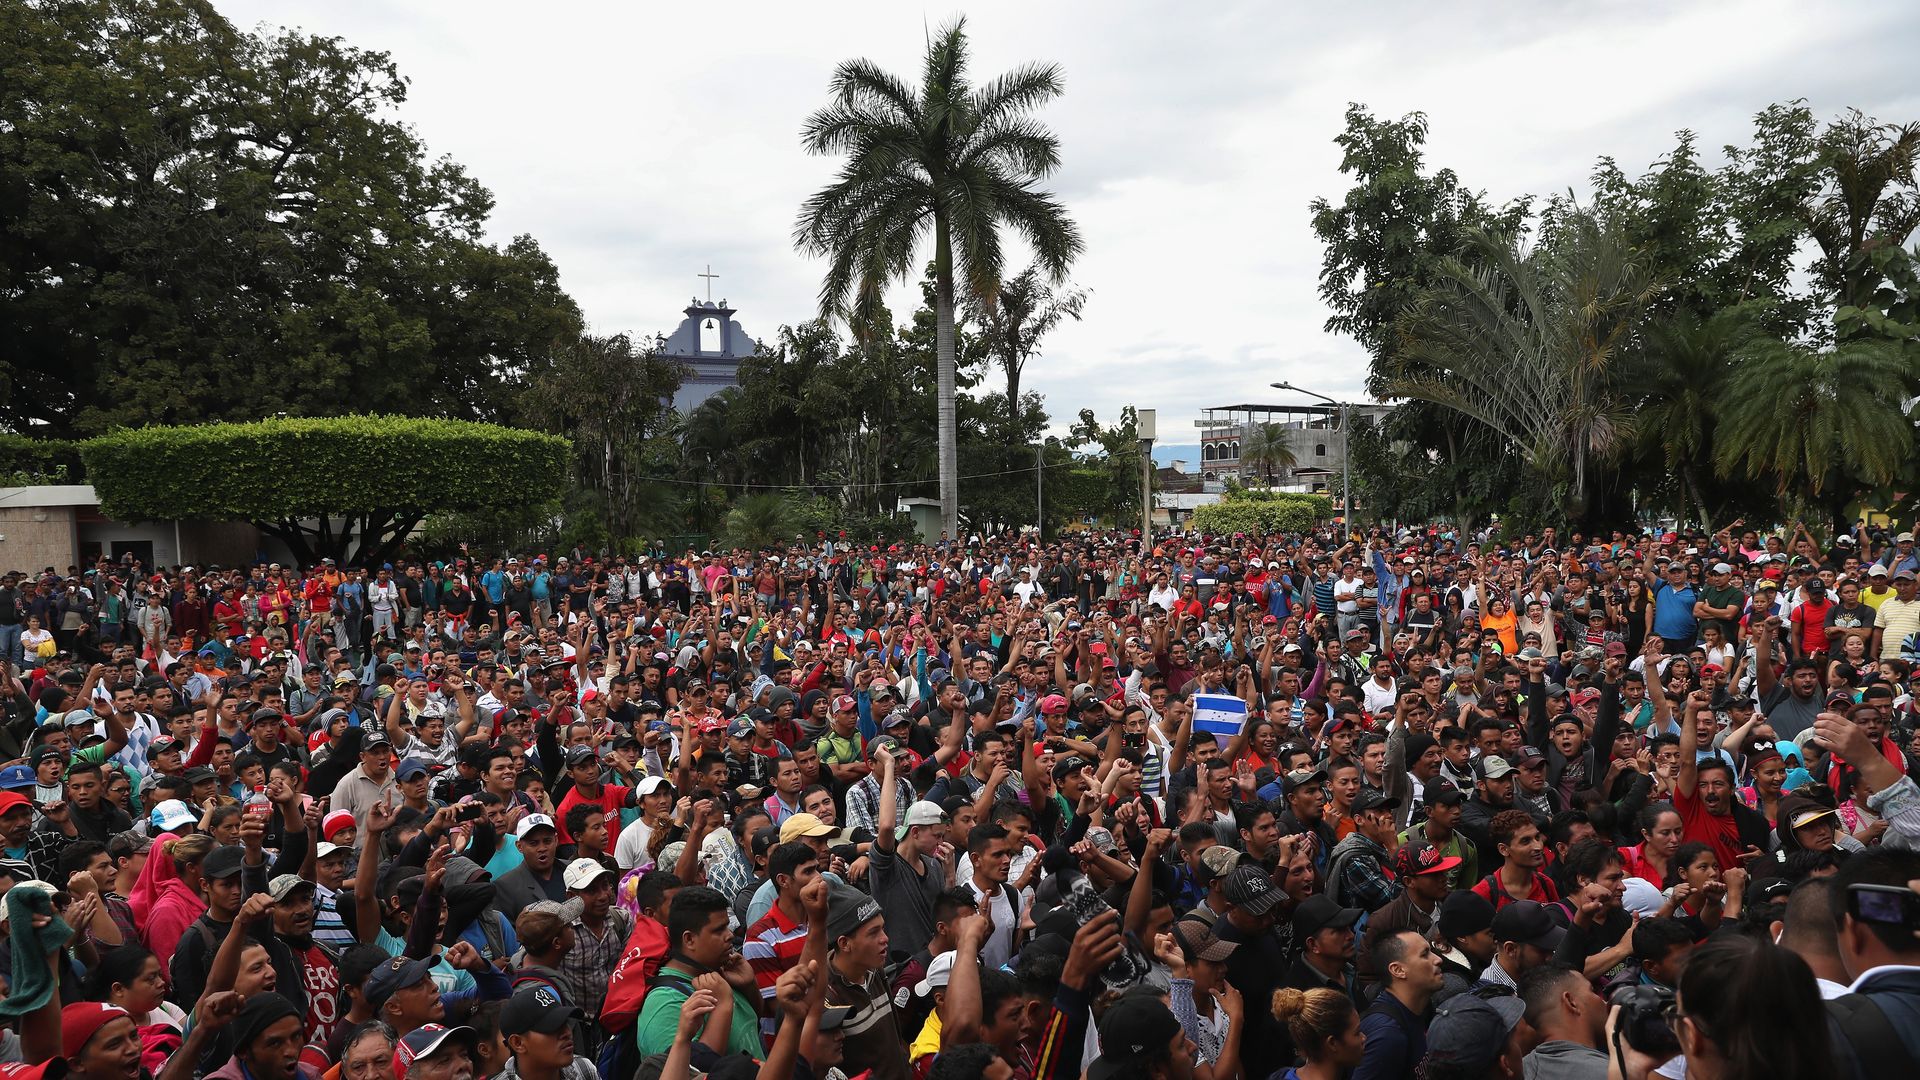 The caravan attempting to cross into Mexico